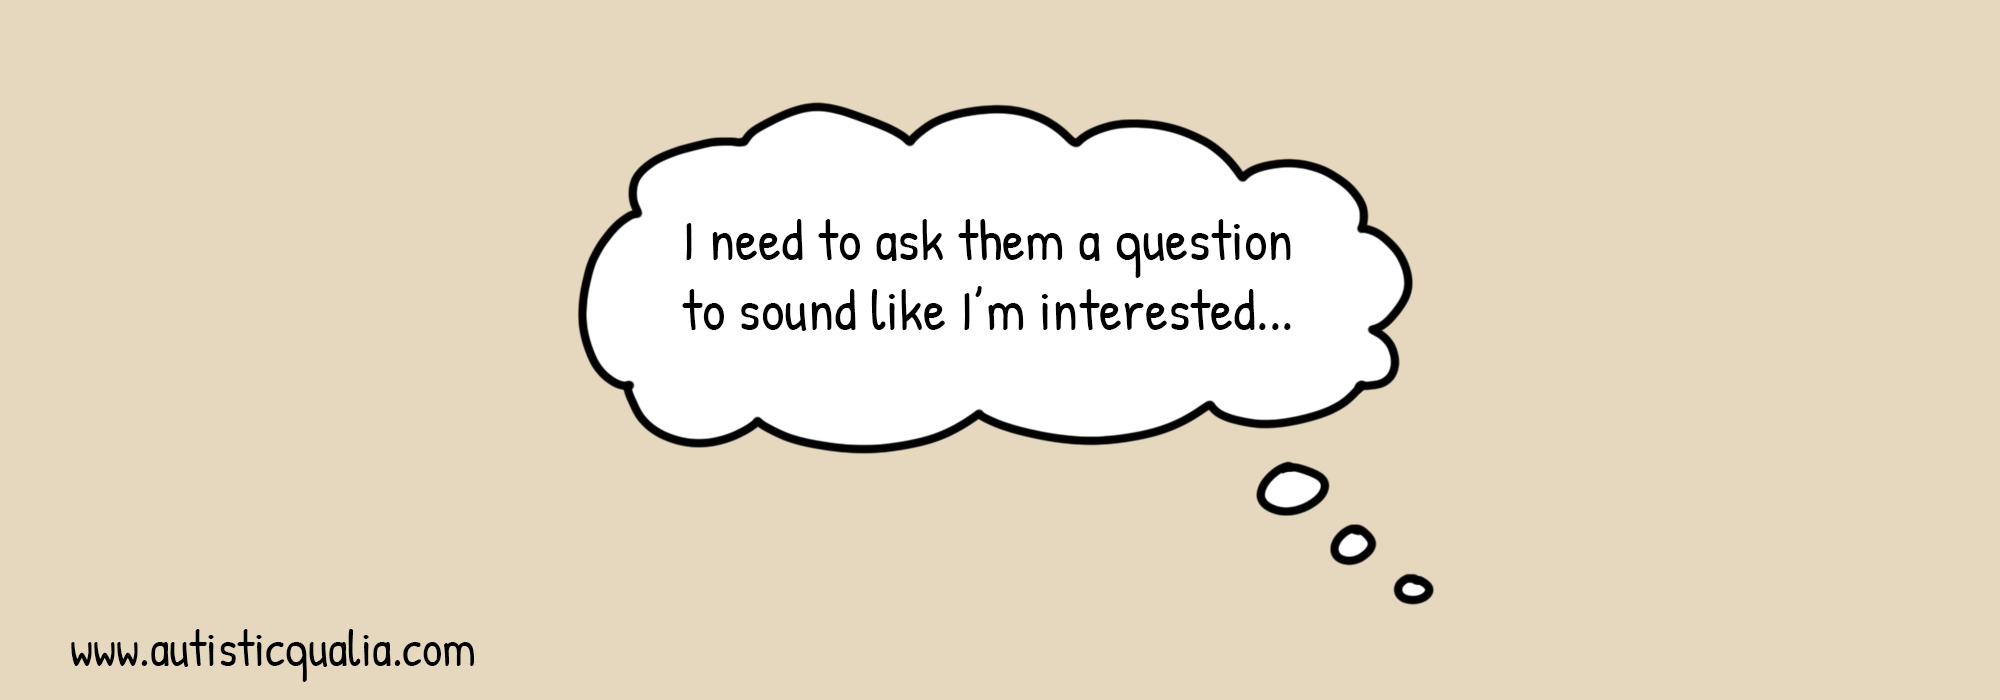 A thought bubble that says "I need to ask them a question to sound like I’m interested..."